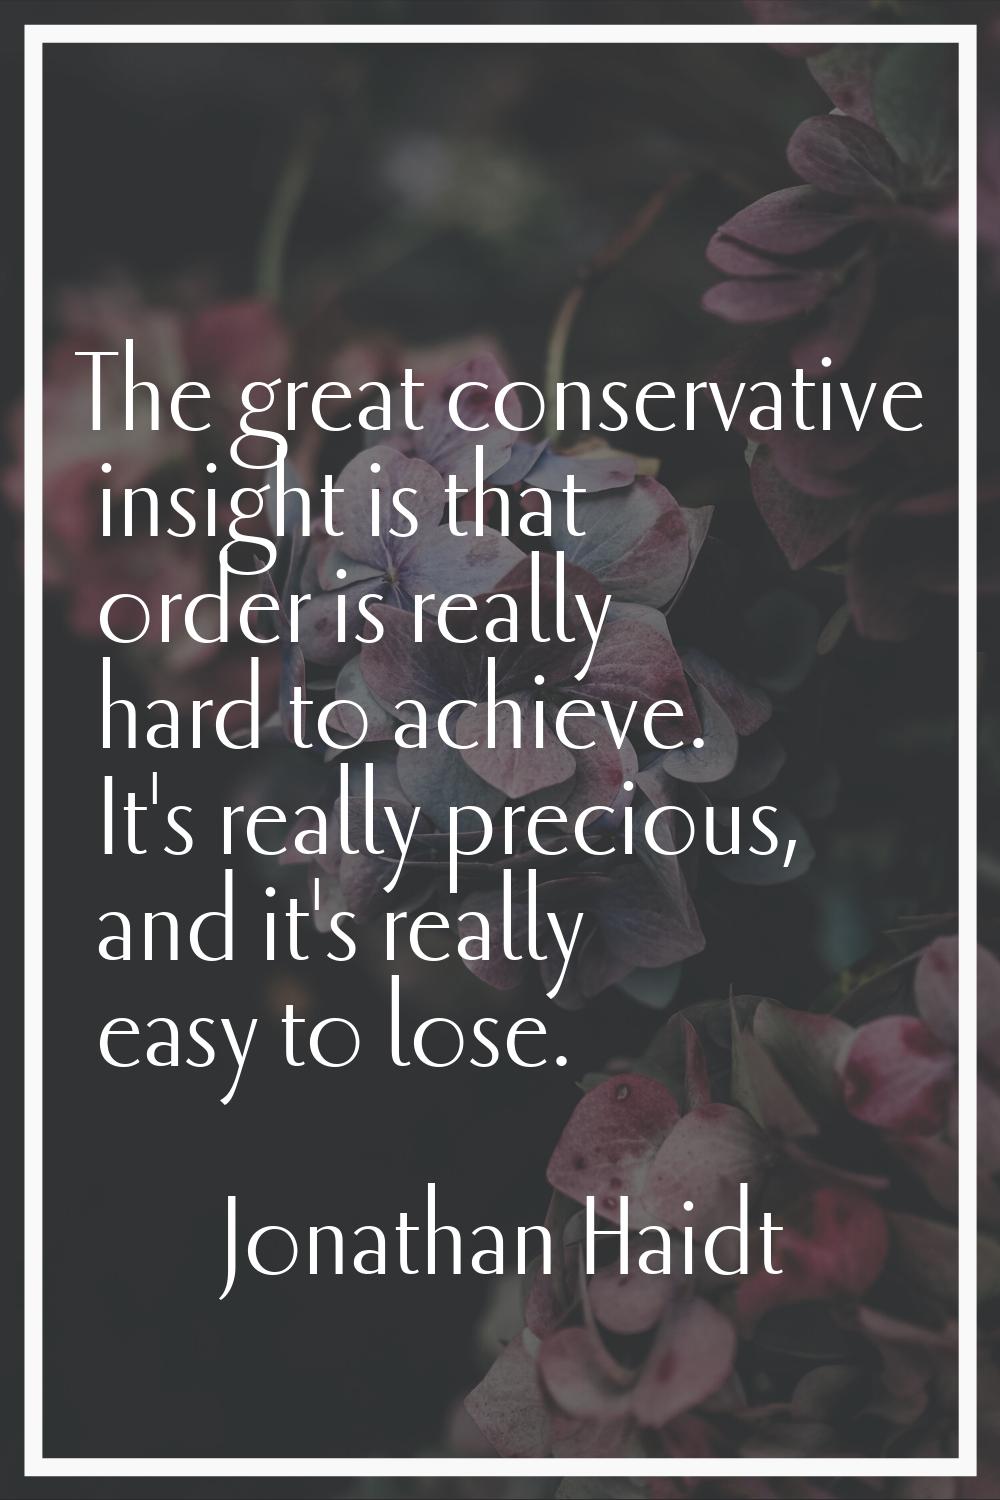 The great conservative insight is that order is really hard to achieve. It's really precious, and i